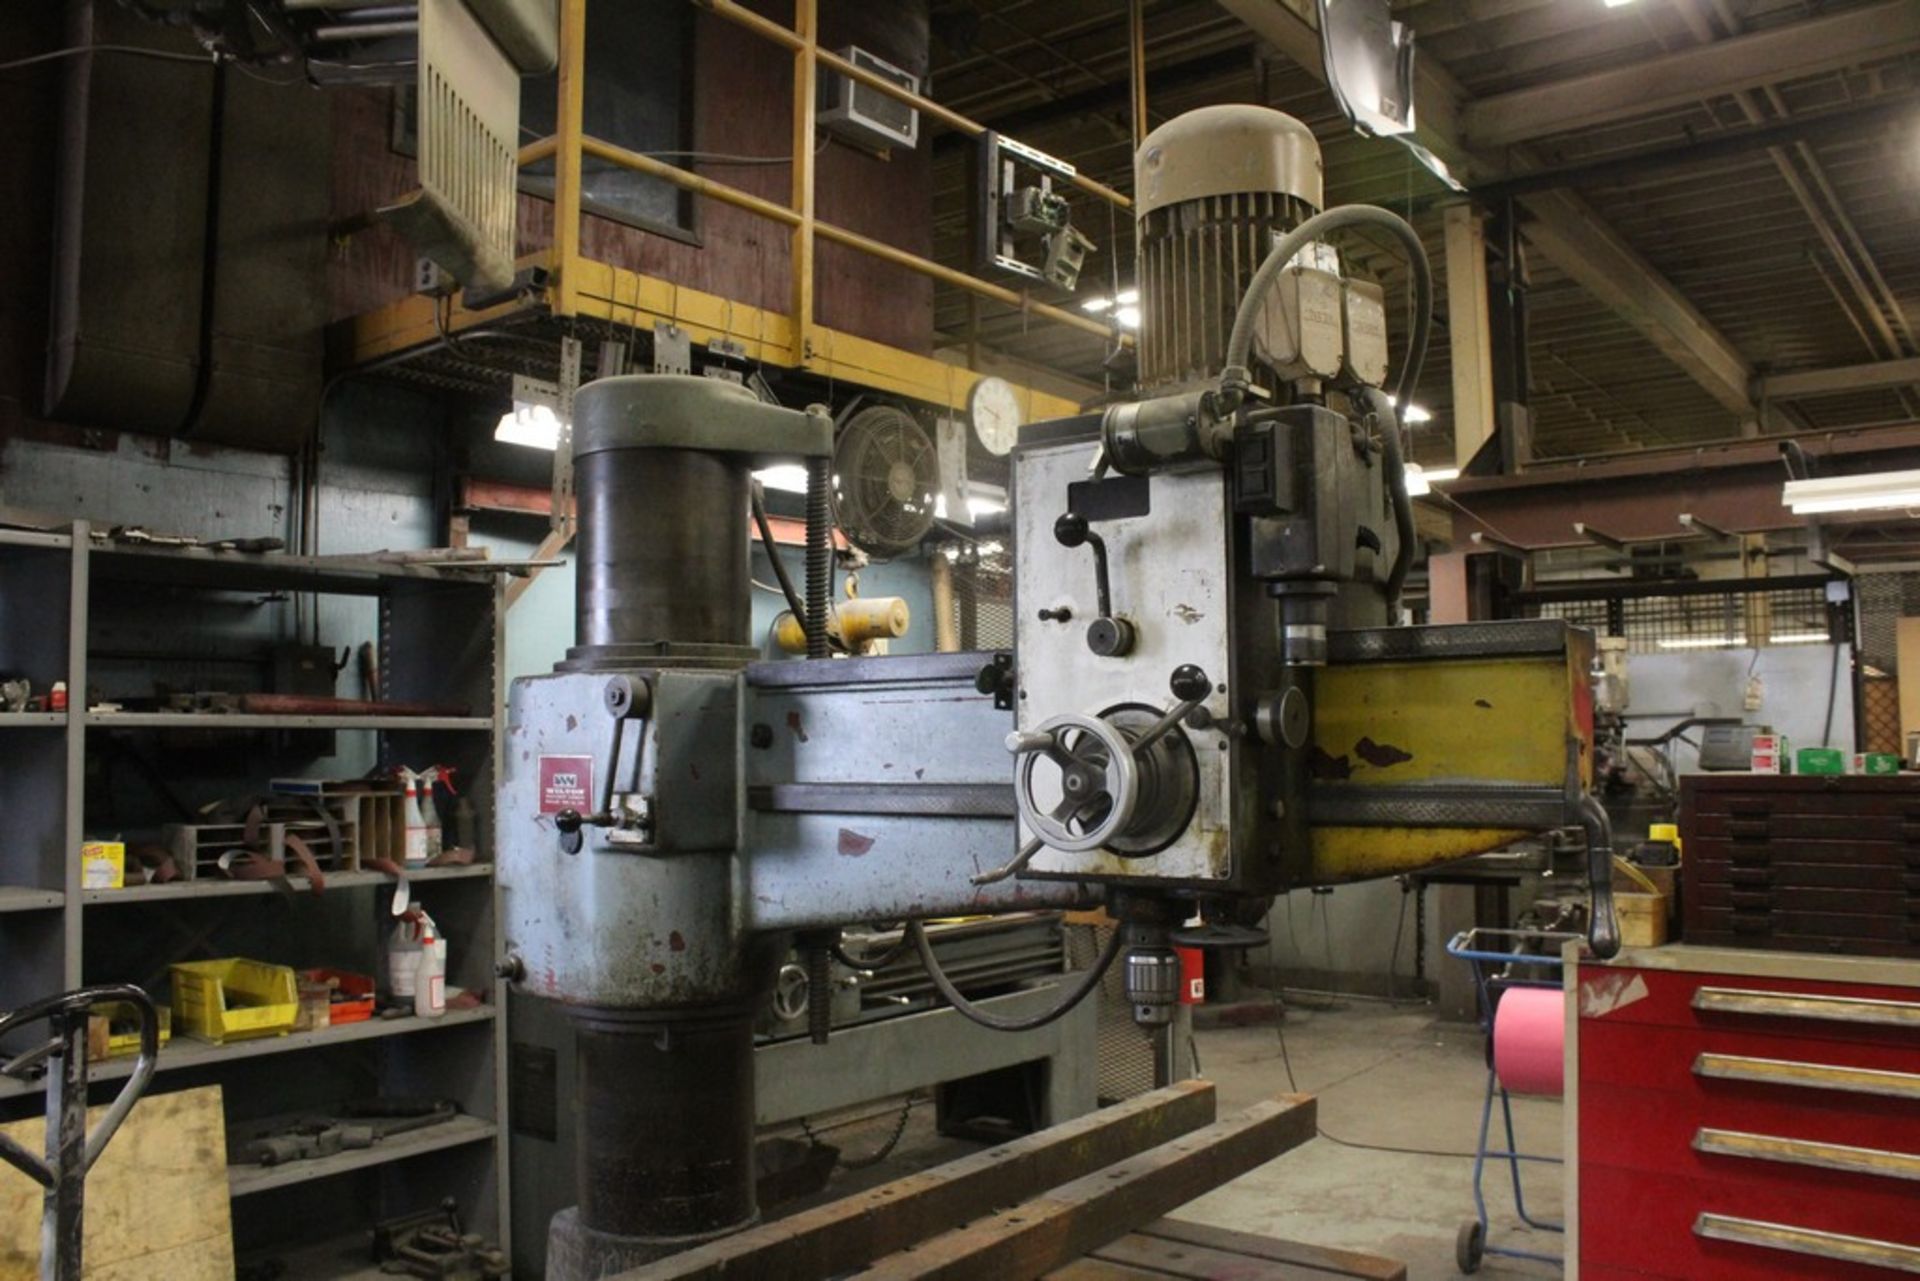 WILTON 4’ ARM 12” COLUMN RADIAL ARM DRILL WITH BOX TABLE Loading Fee: $300 - Image 2 of 7